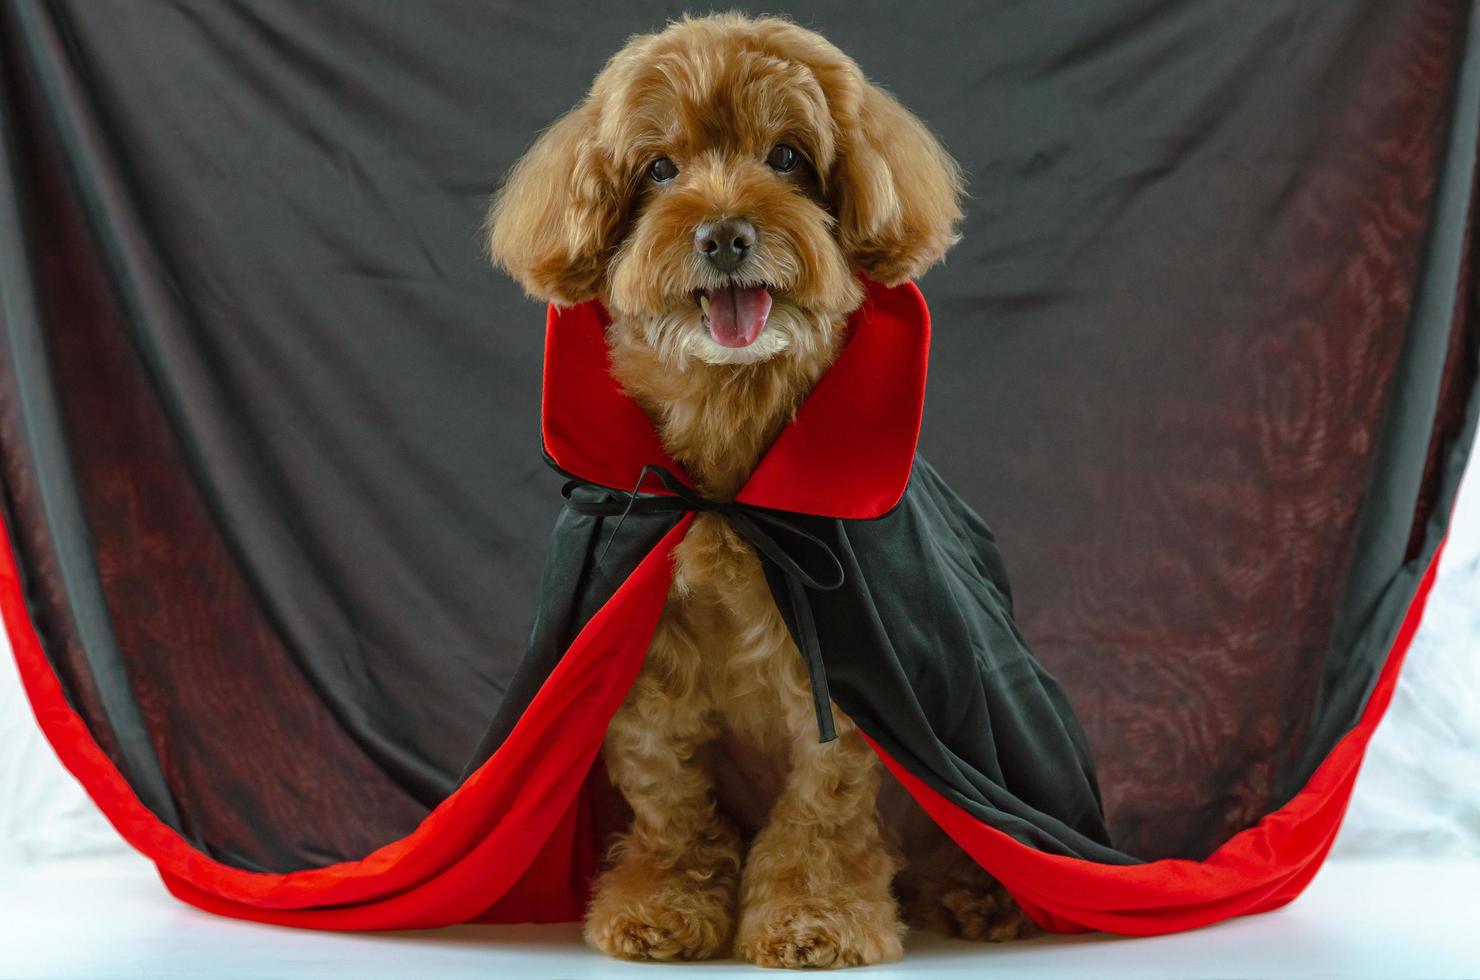 Adorable brown Poodle dog with Dracula dress. photo